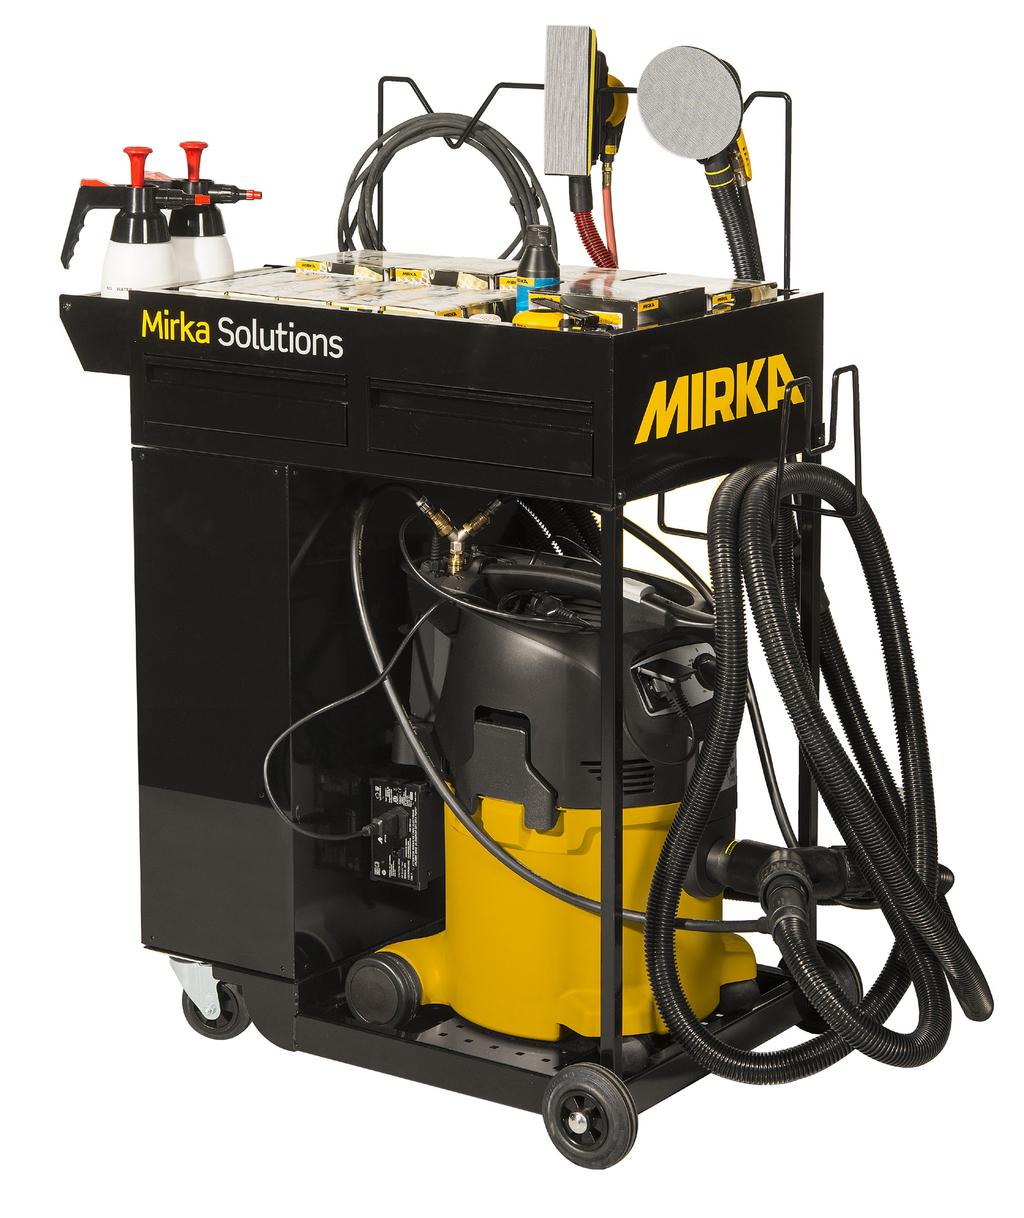 The Mirka Smart Cart Helps Keep You Organized The Mirka Smart Cart is the perfect solution to integrate all your abrasives, tools, and dust extractor as one dust-free sanding system.